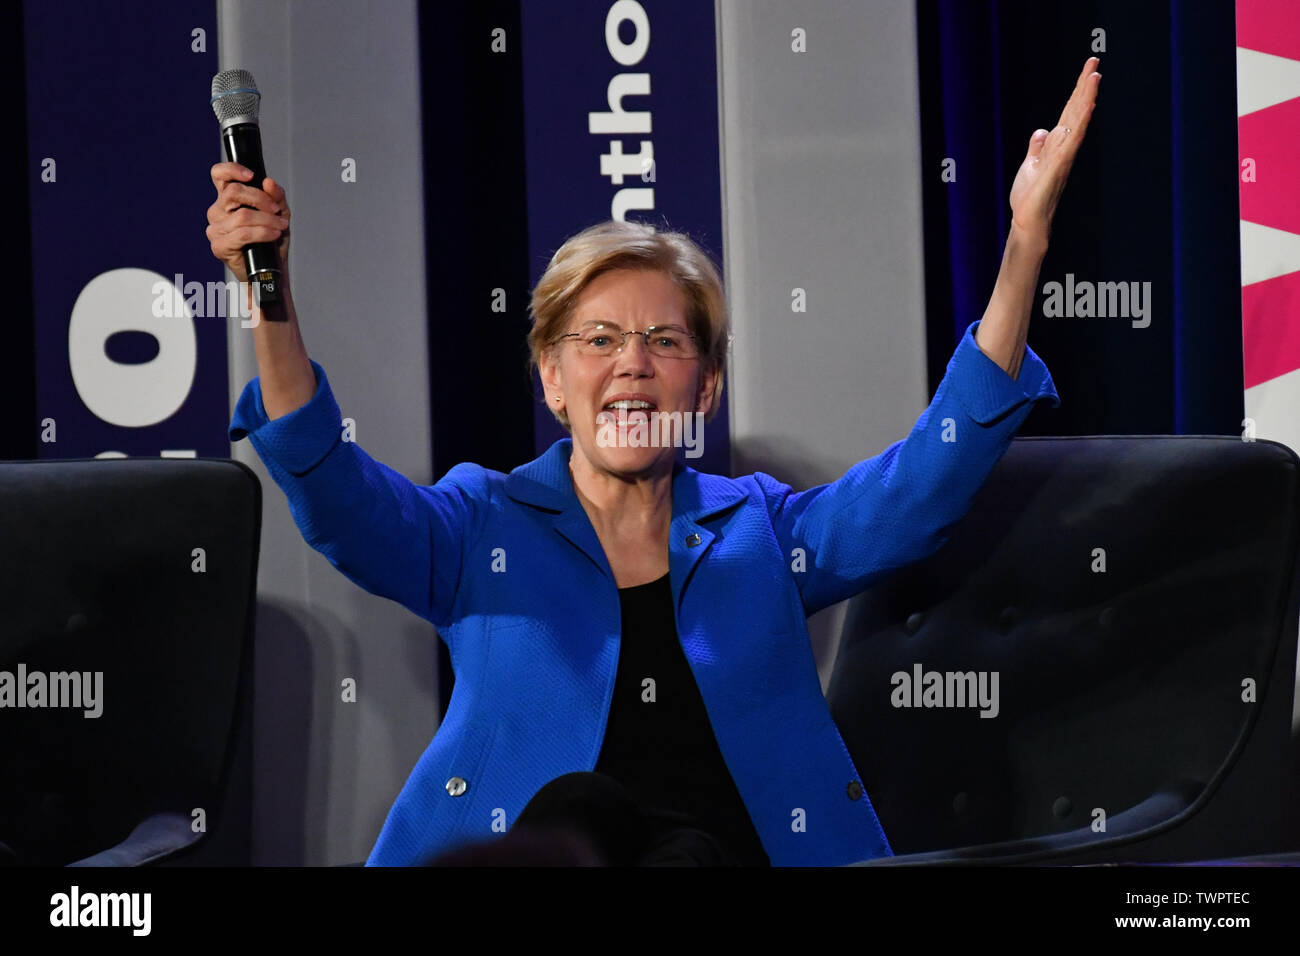 Columbia, South Carolina, USA. 22nd June 2019.  Democratic presidential hopeful Sen. Elizabeth Warren addresses the Planned Parenthood Action Fund Candidates Forum June 22, 2019 in Columbia, South Carolina. A slate of 20 Democratic presidential contenders are addressing the gathering of supporters of reproductive rights. Stock Photo